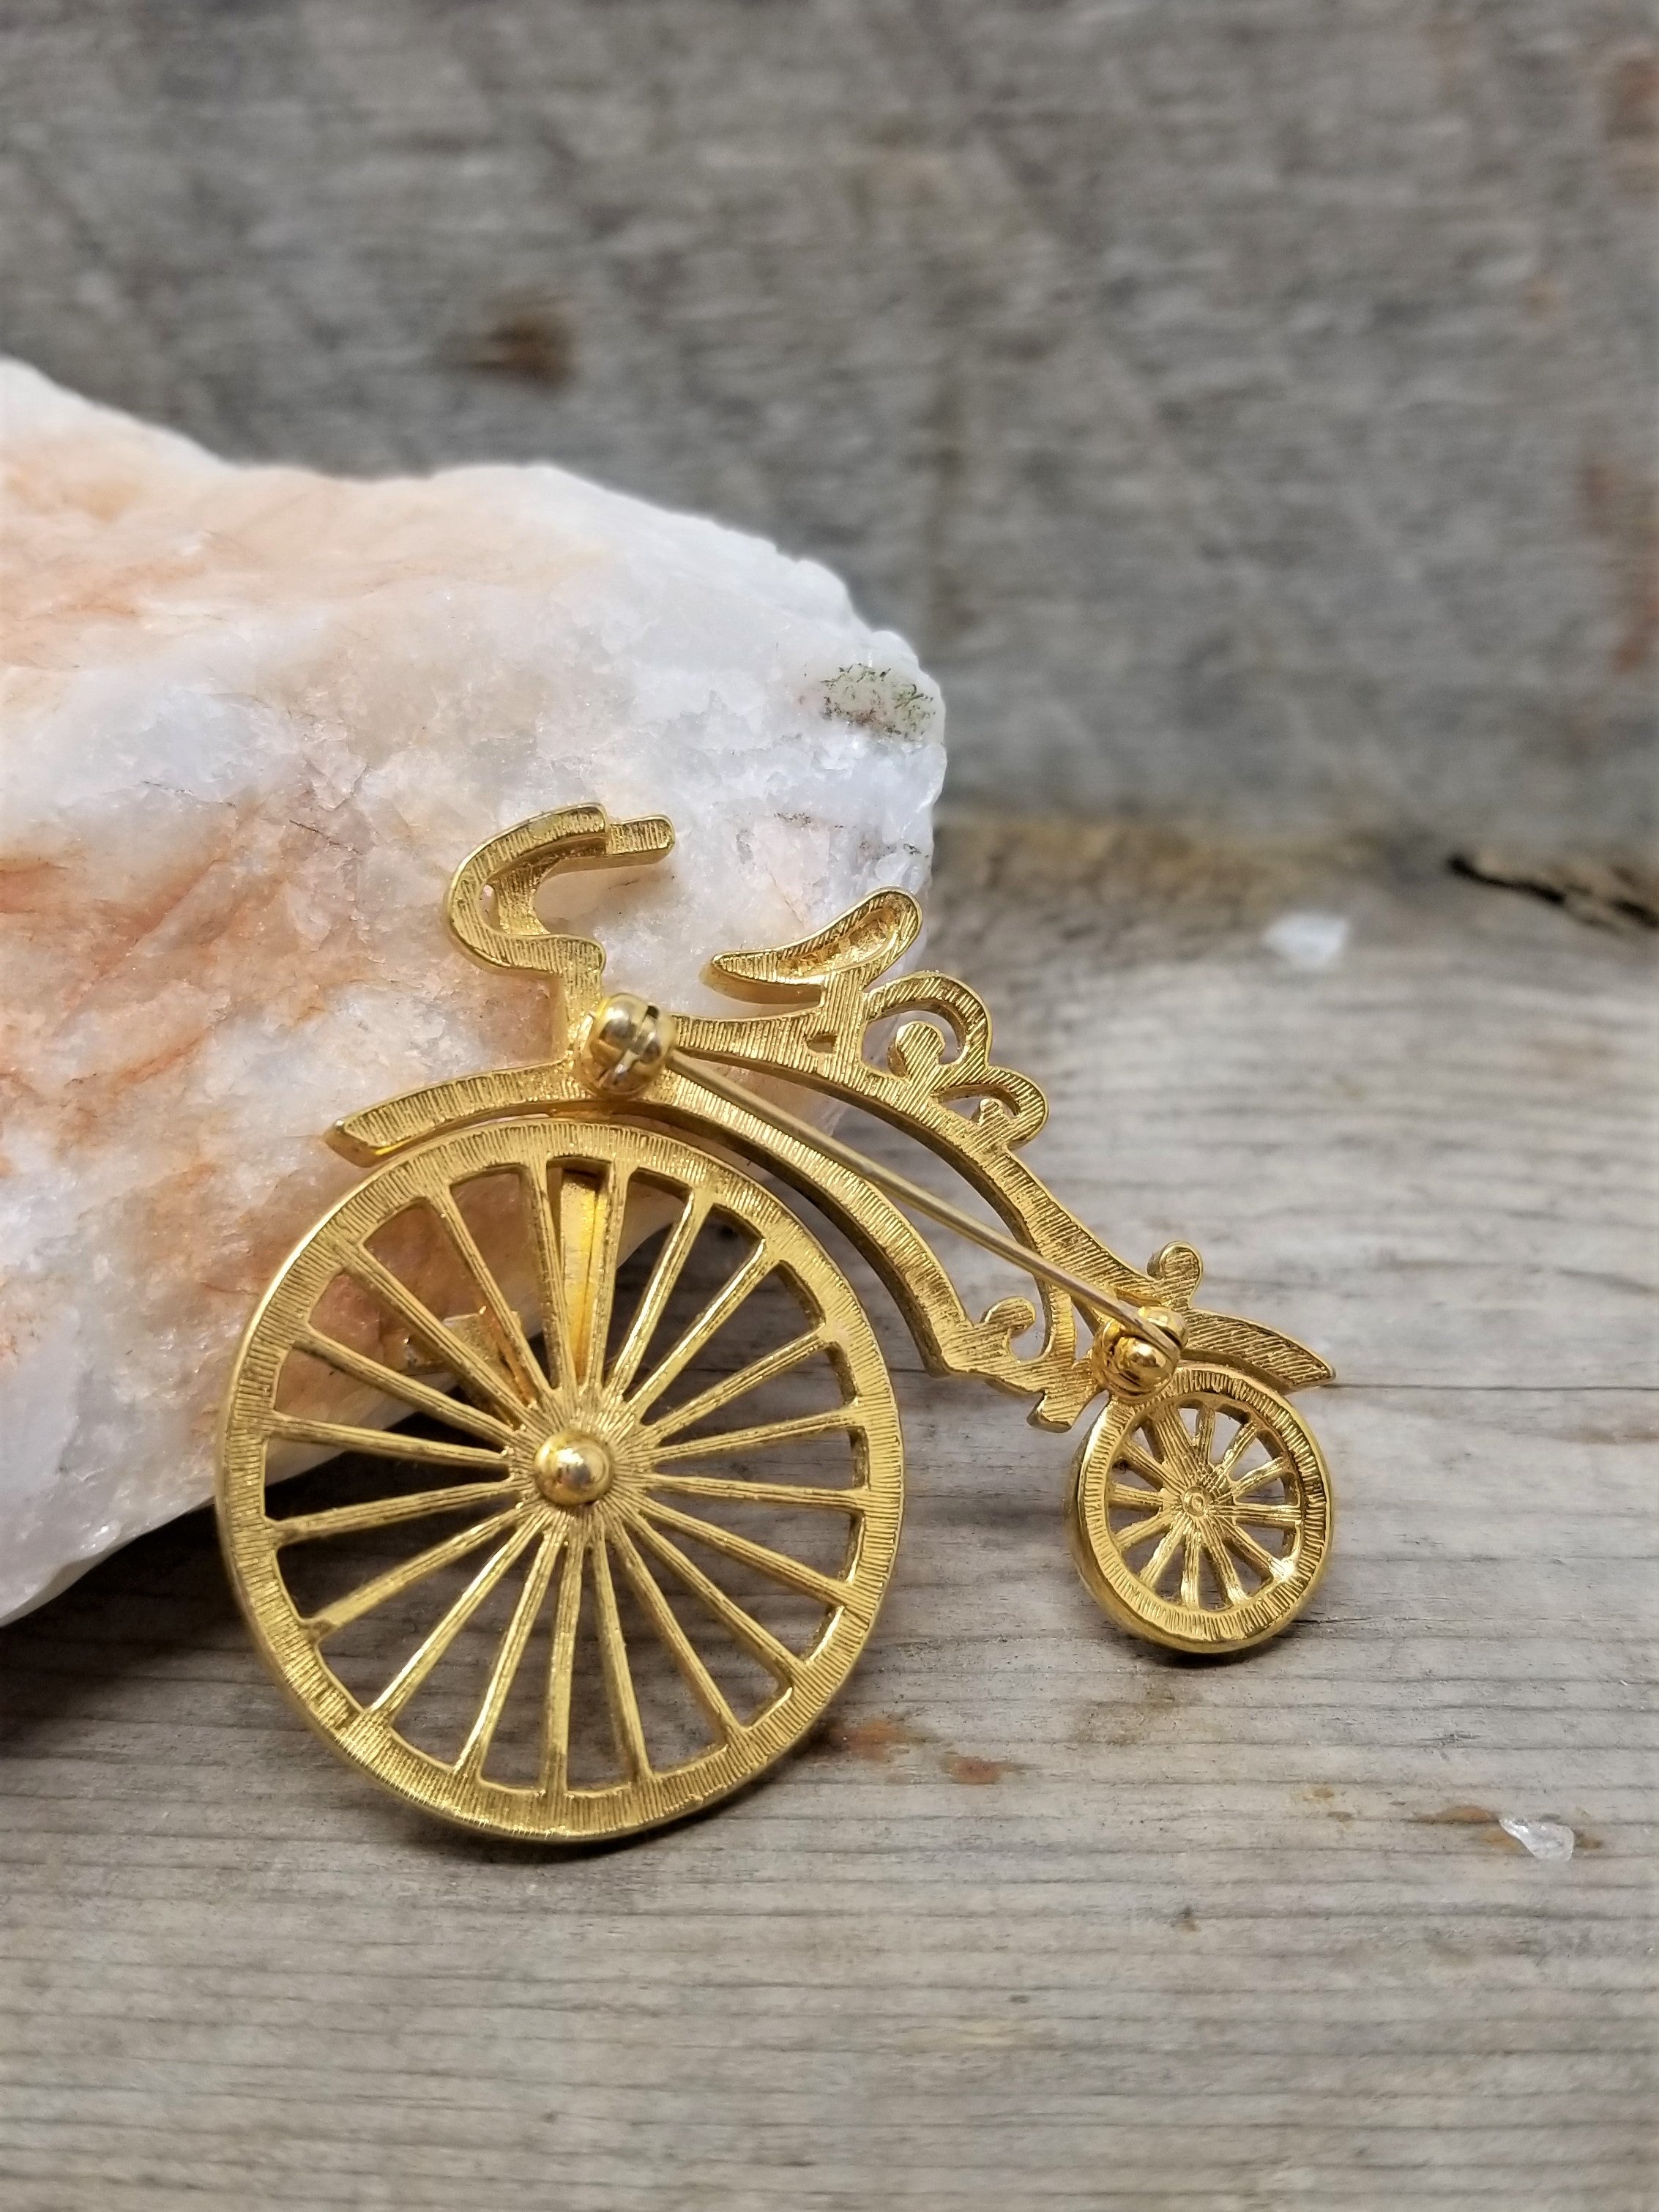 Vintage Old fashion Bicycle Pin with movable Wheel Gold